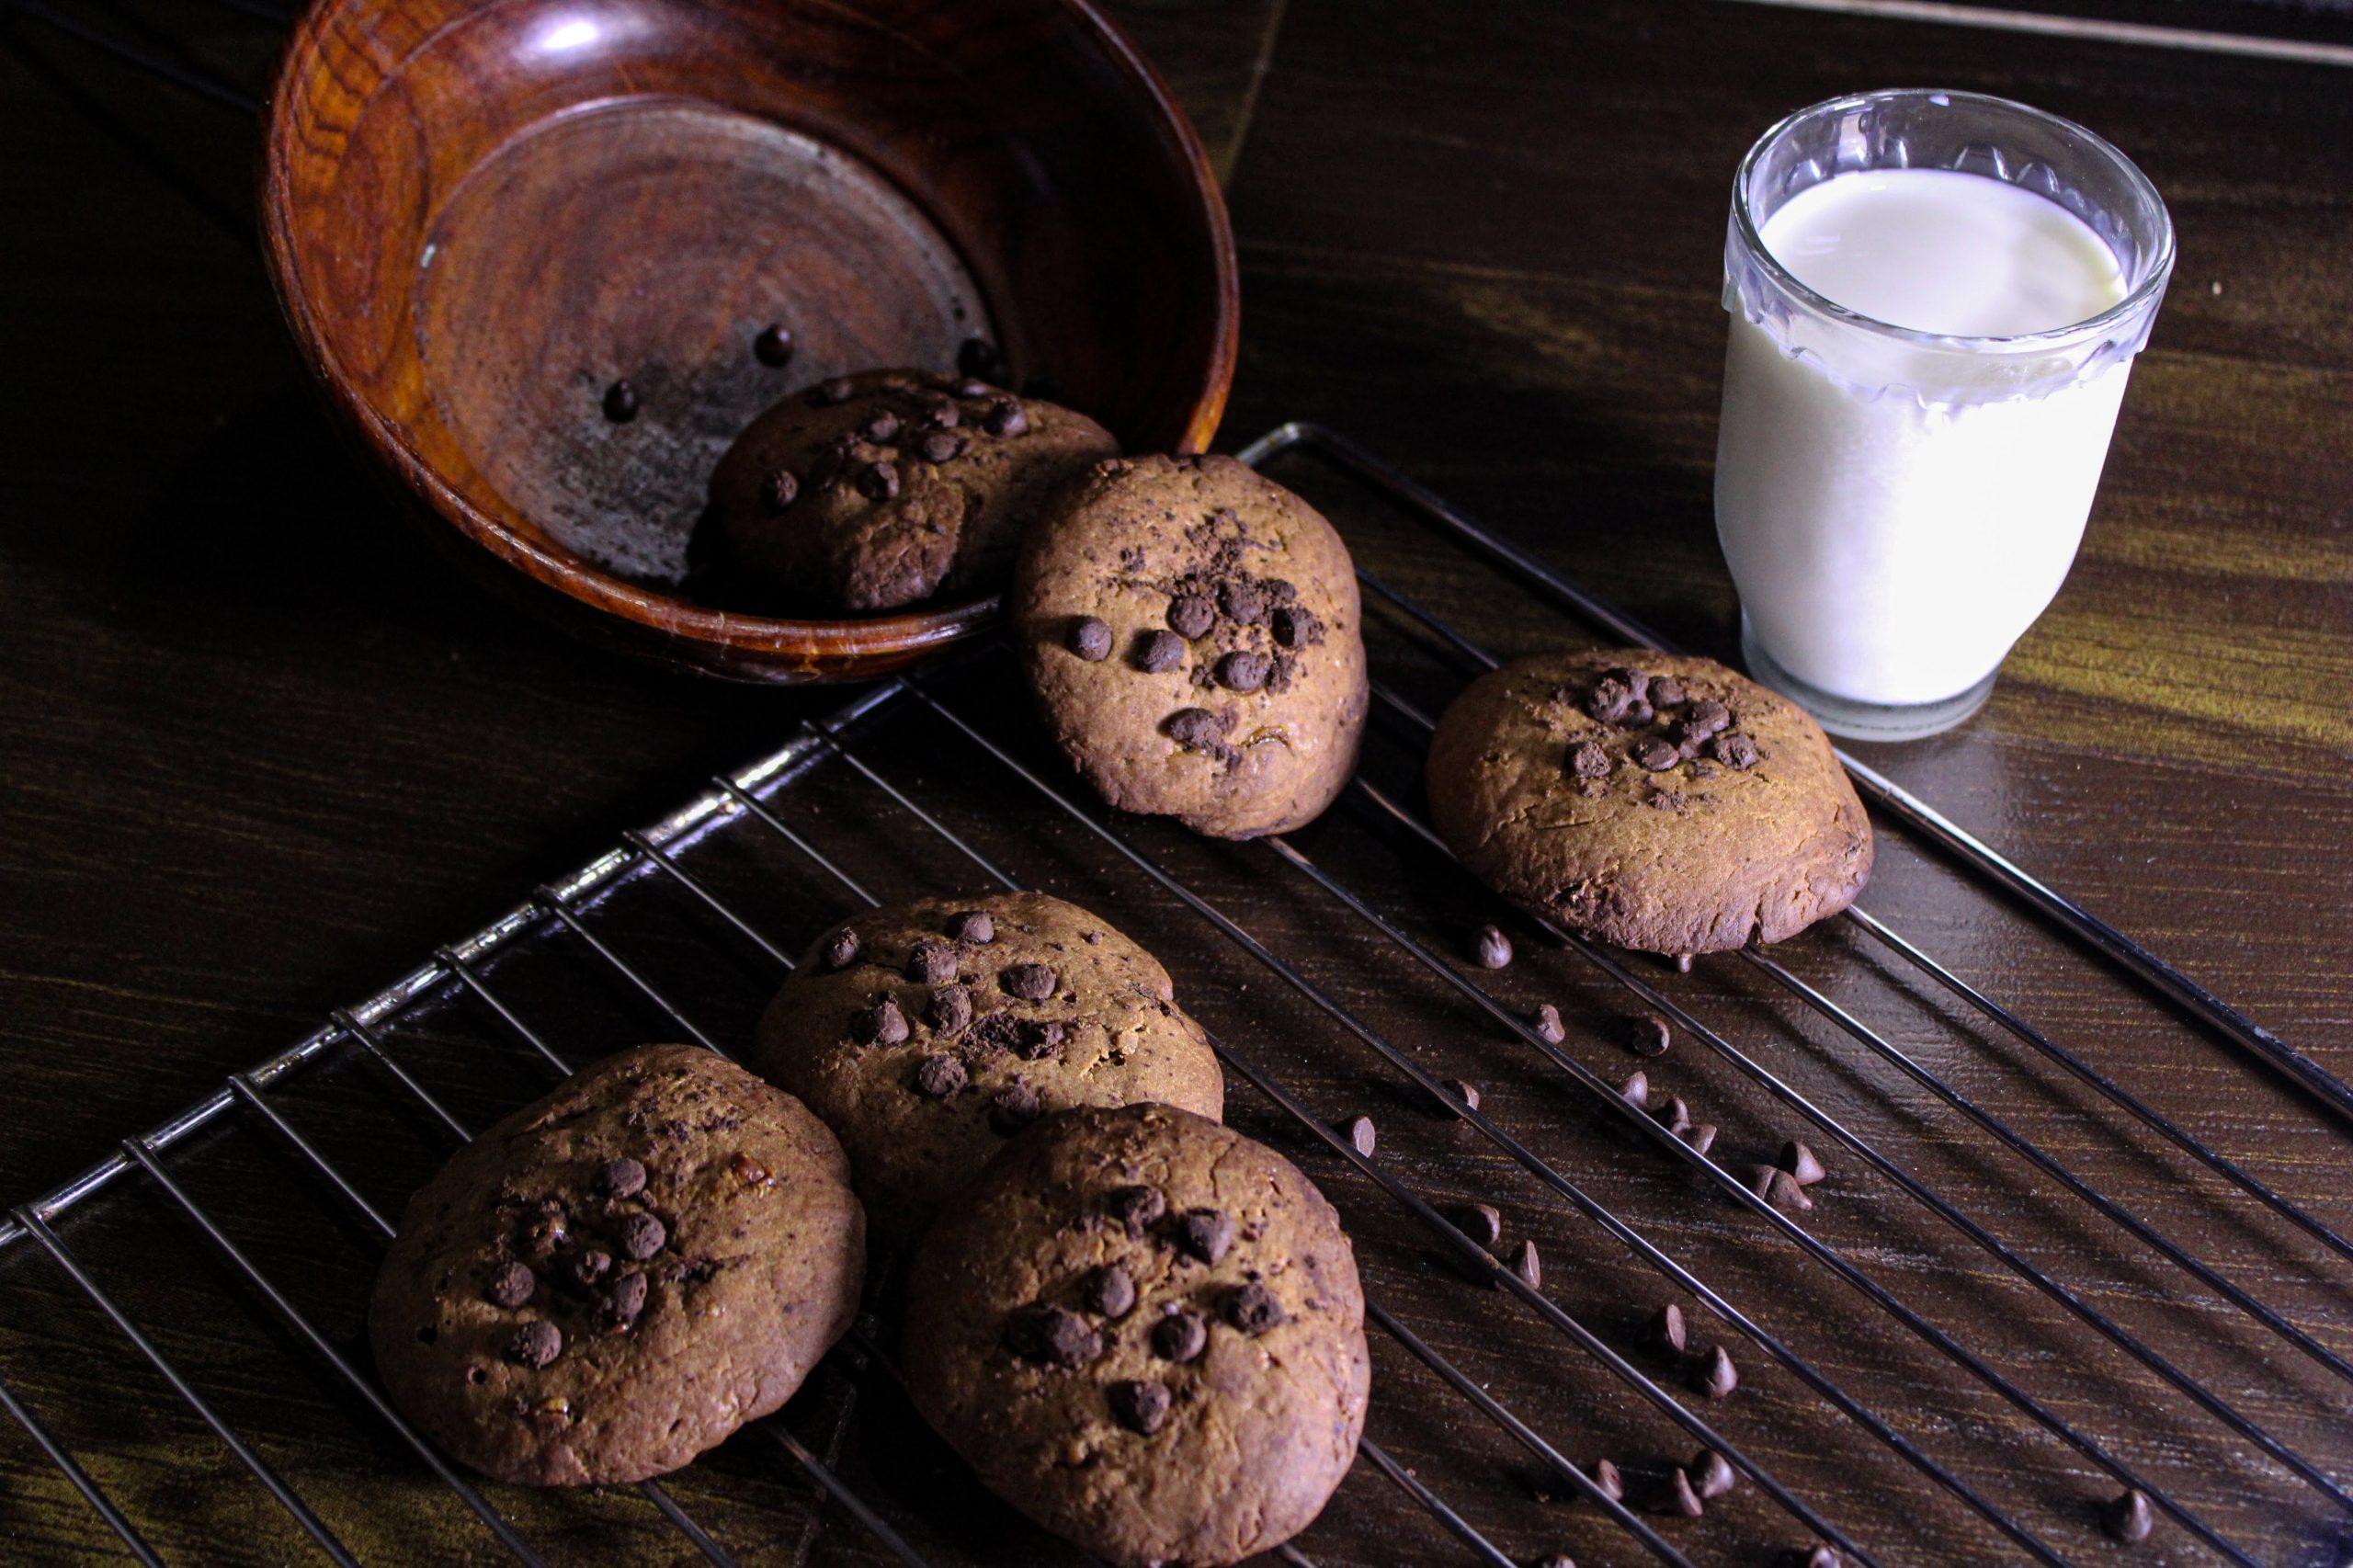 Chocolate chip cookies with a glass of milk